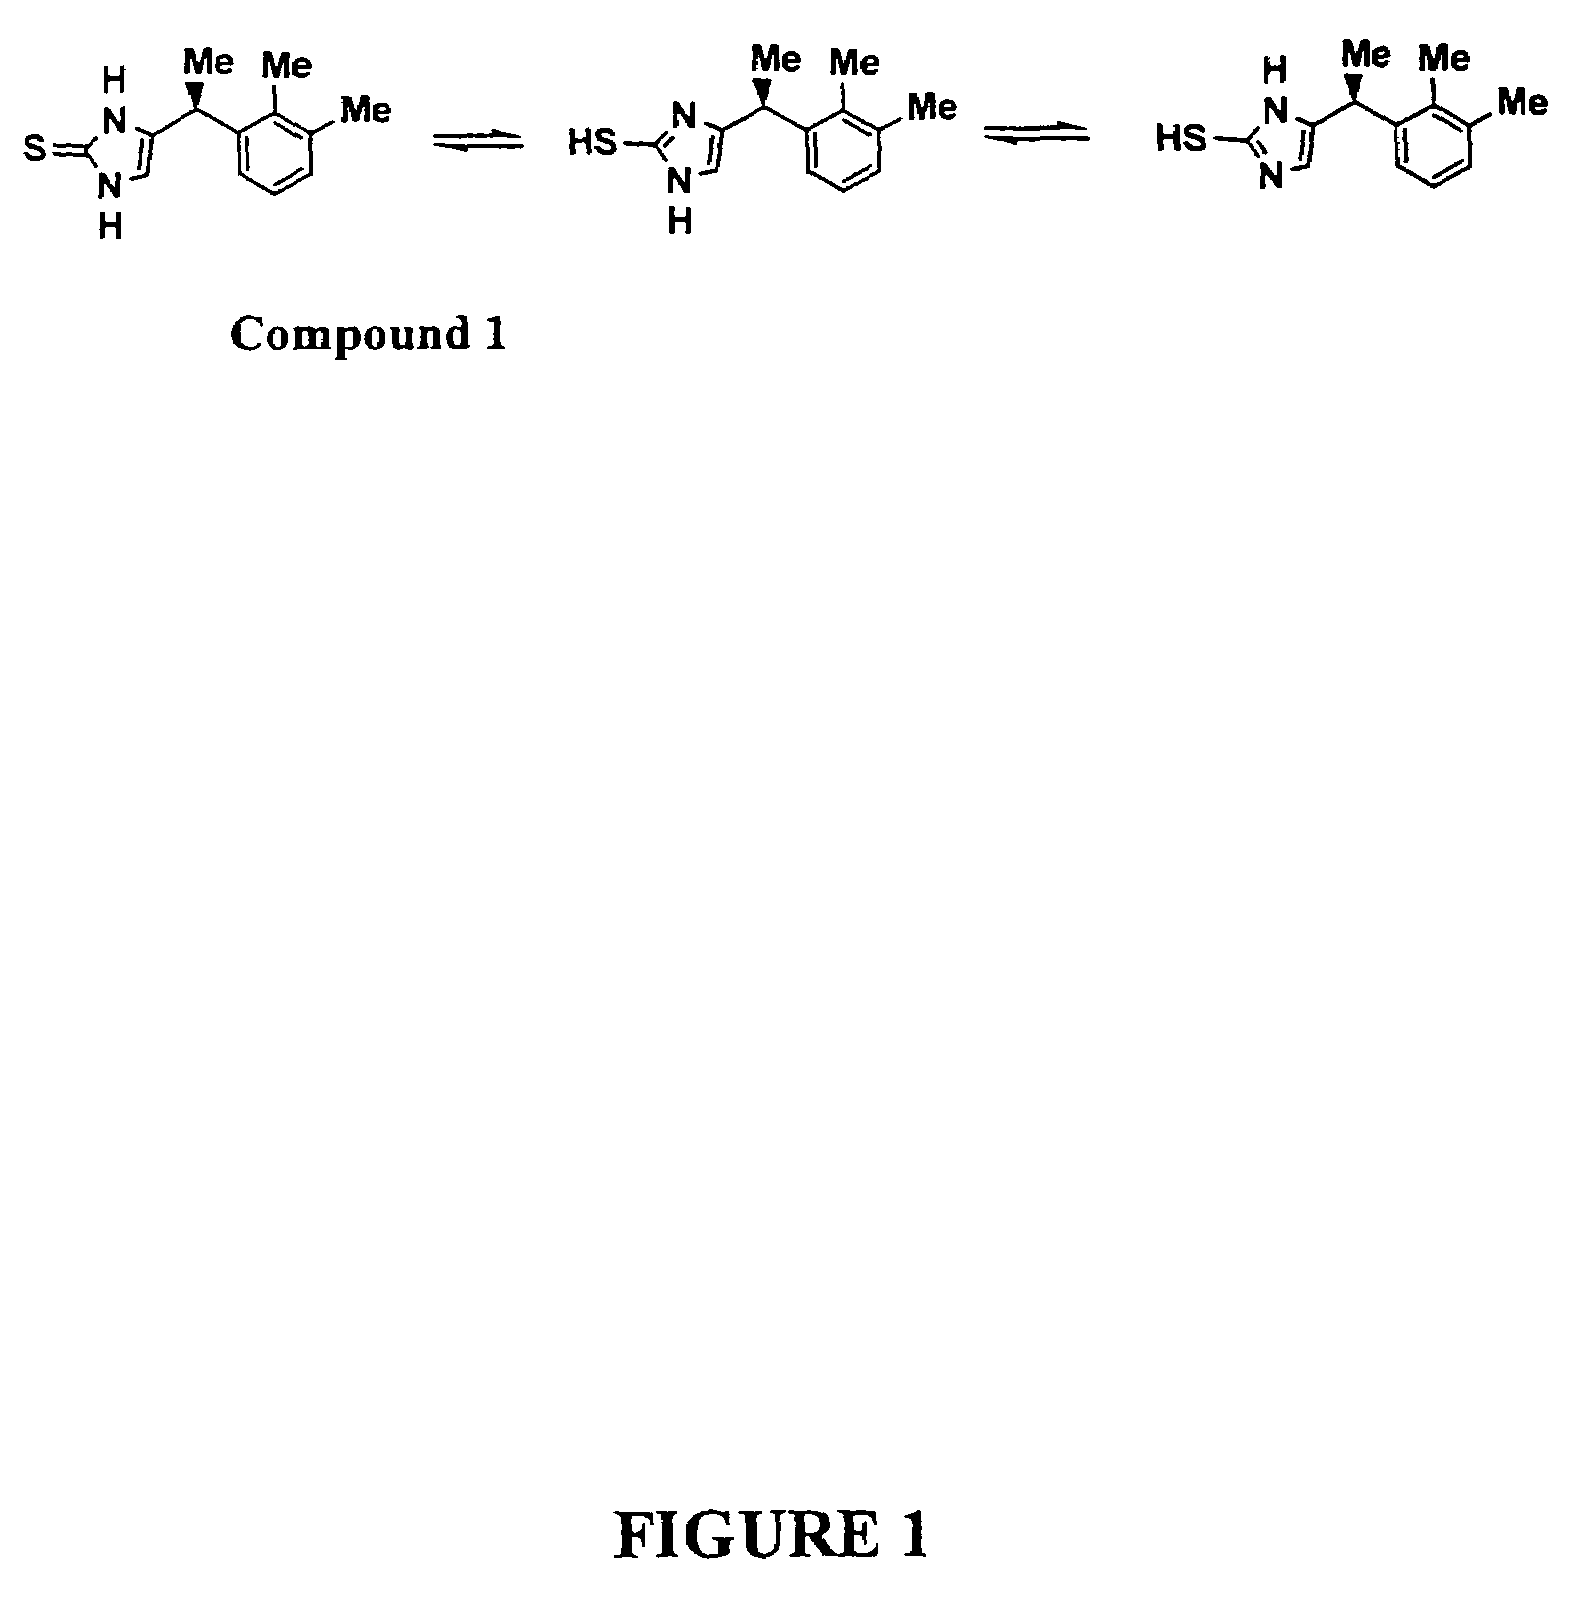 Nonsedating alpha-2 agonists